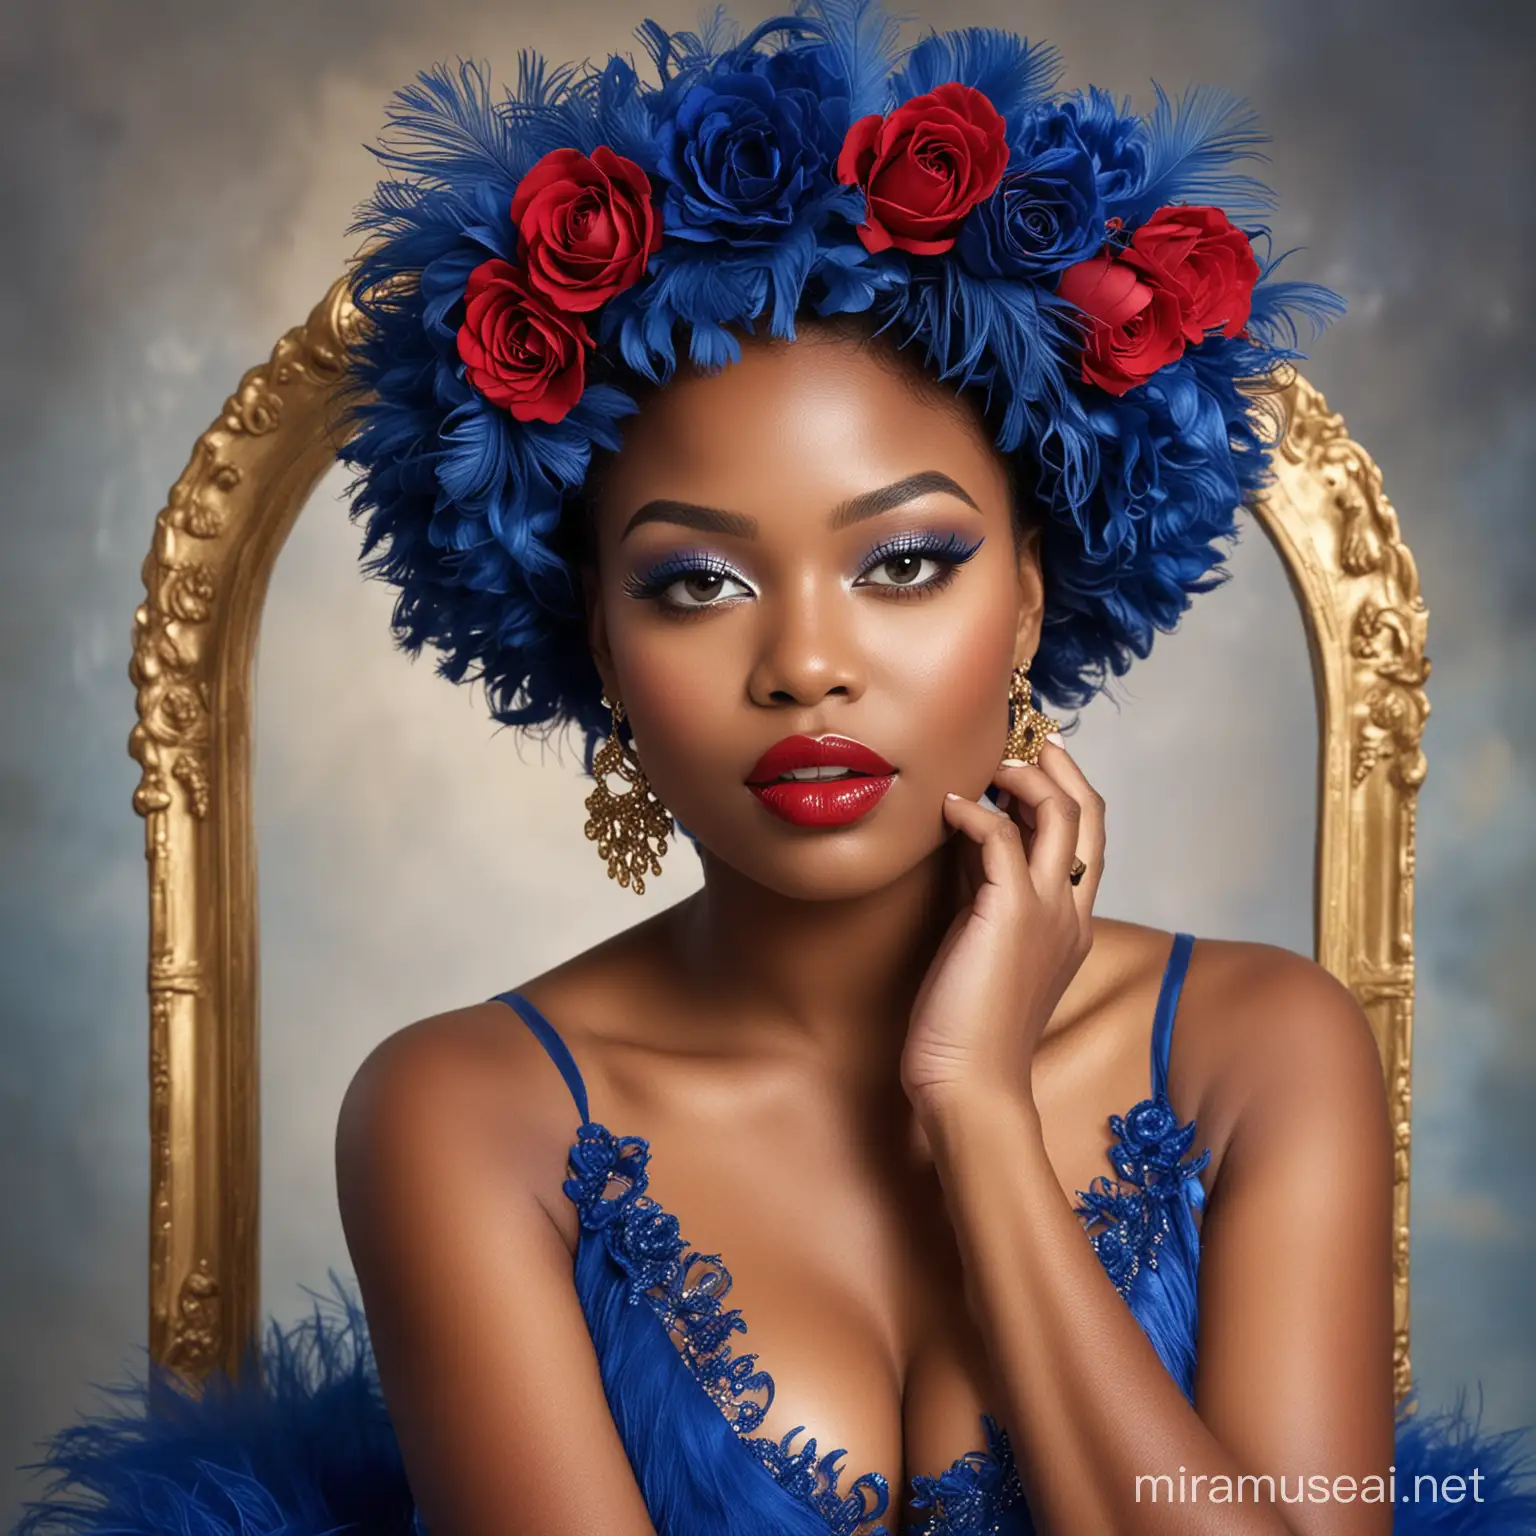 Illustrate gorgeous CURVY African American model WITH LARGE EYES, AIR BRUSHED SKIN, wearing a GOLD & BLUE floral headpiece WEARING RED LIPSTICK, SLIGHTLY SMILING,   roses. A sleevless bell shaped babydoll dress coverd in  ROYAL BLUE  Ostrich Feathers and STILLETOS high heel shoes covered in ROYAL BLUE roses. WEARING BEAUTIFUL JEWELRY, GOLD FINGERNAIL POLISH HOLDING HER HANDS OVER HER MOUTH She is SITTING ON A BENCH